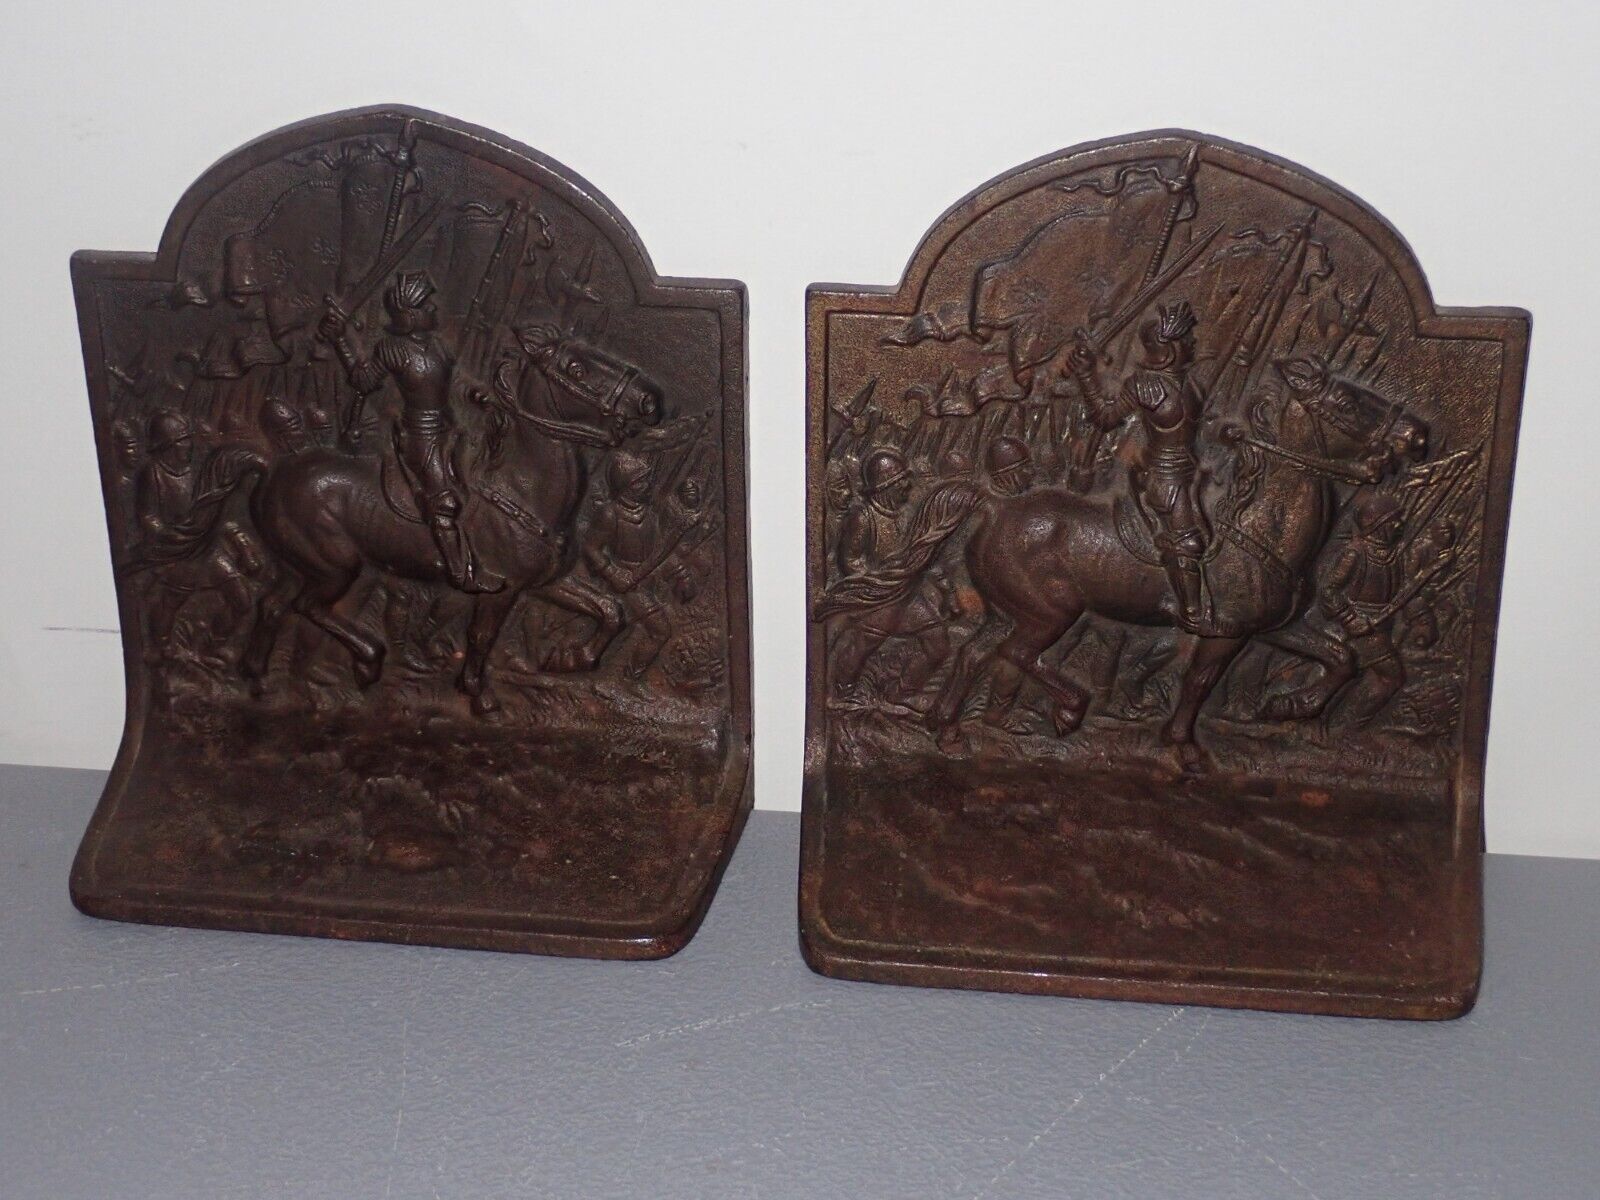 Medieval French Knight & Infantry Bookends 1920s Cast Iron Bronzed, Fleur de lis